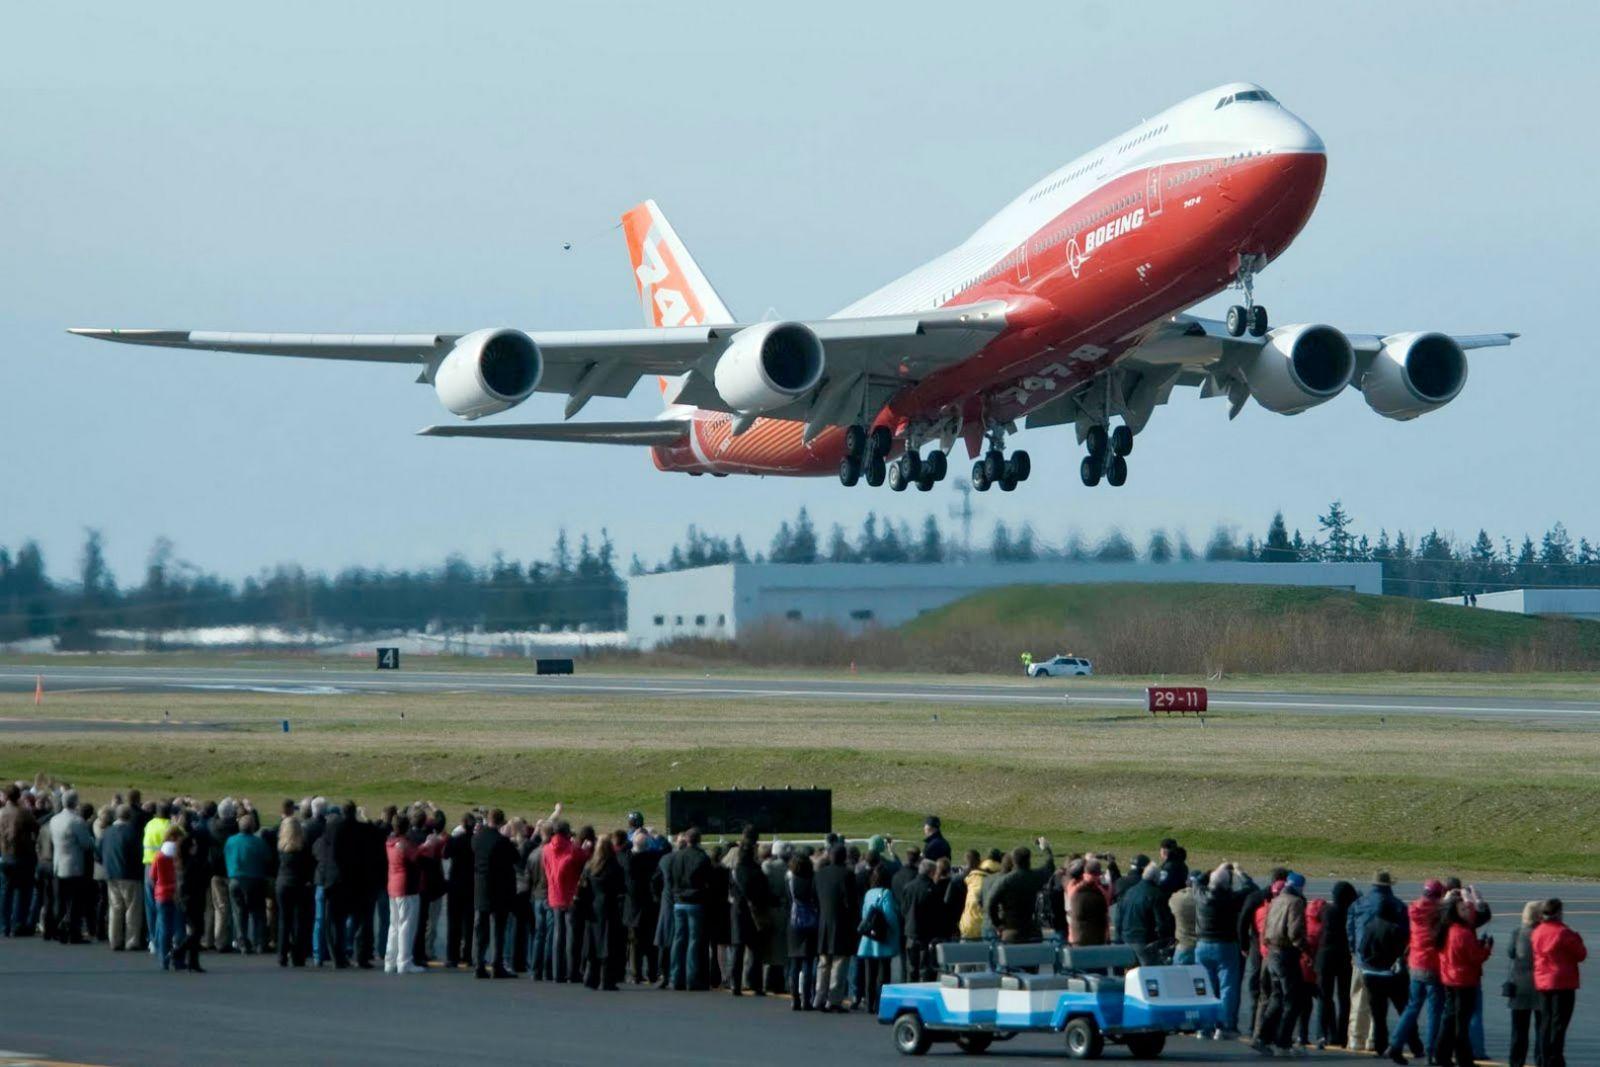 Boeing 747 8 Intercontinental Takes To The Skies